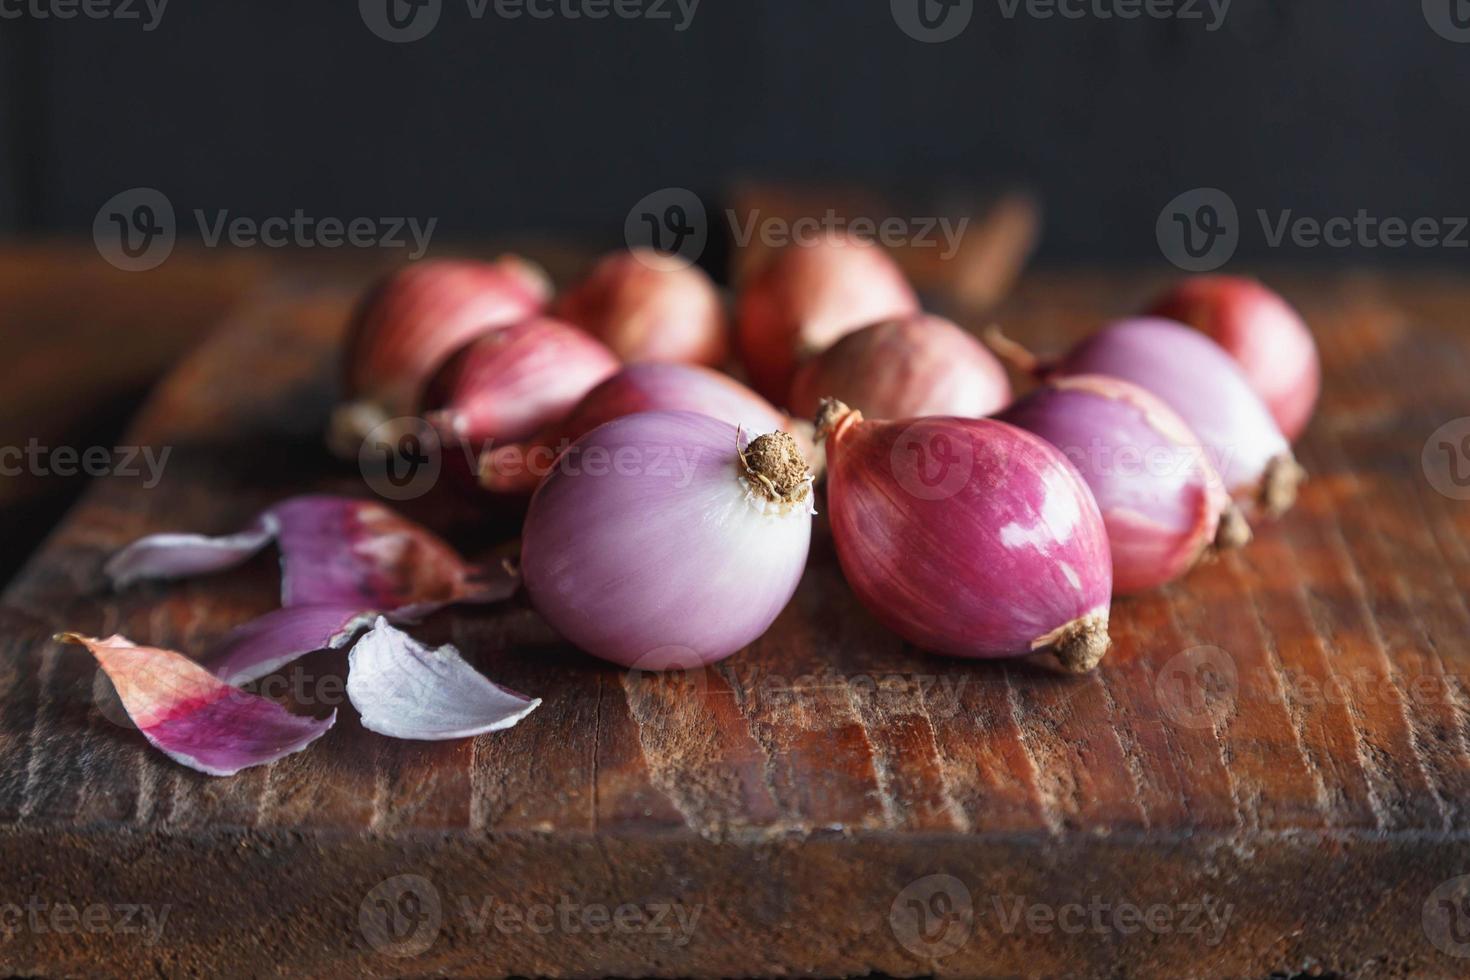 Fresh red onions on rustic wood photo